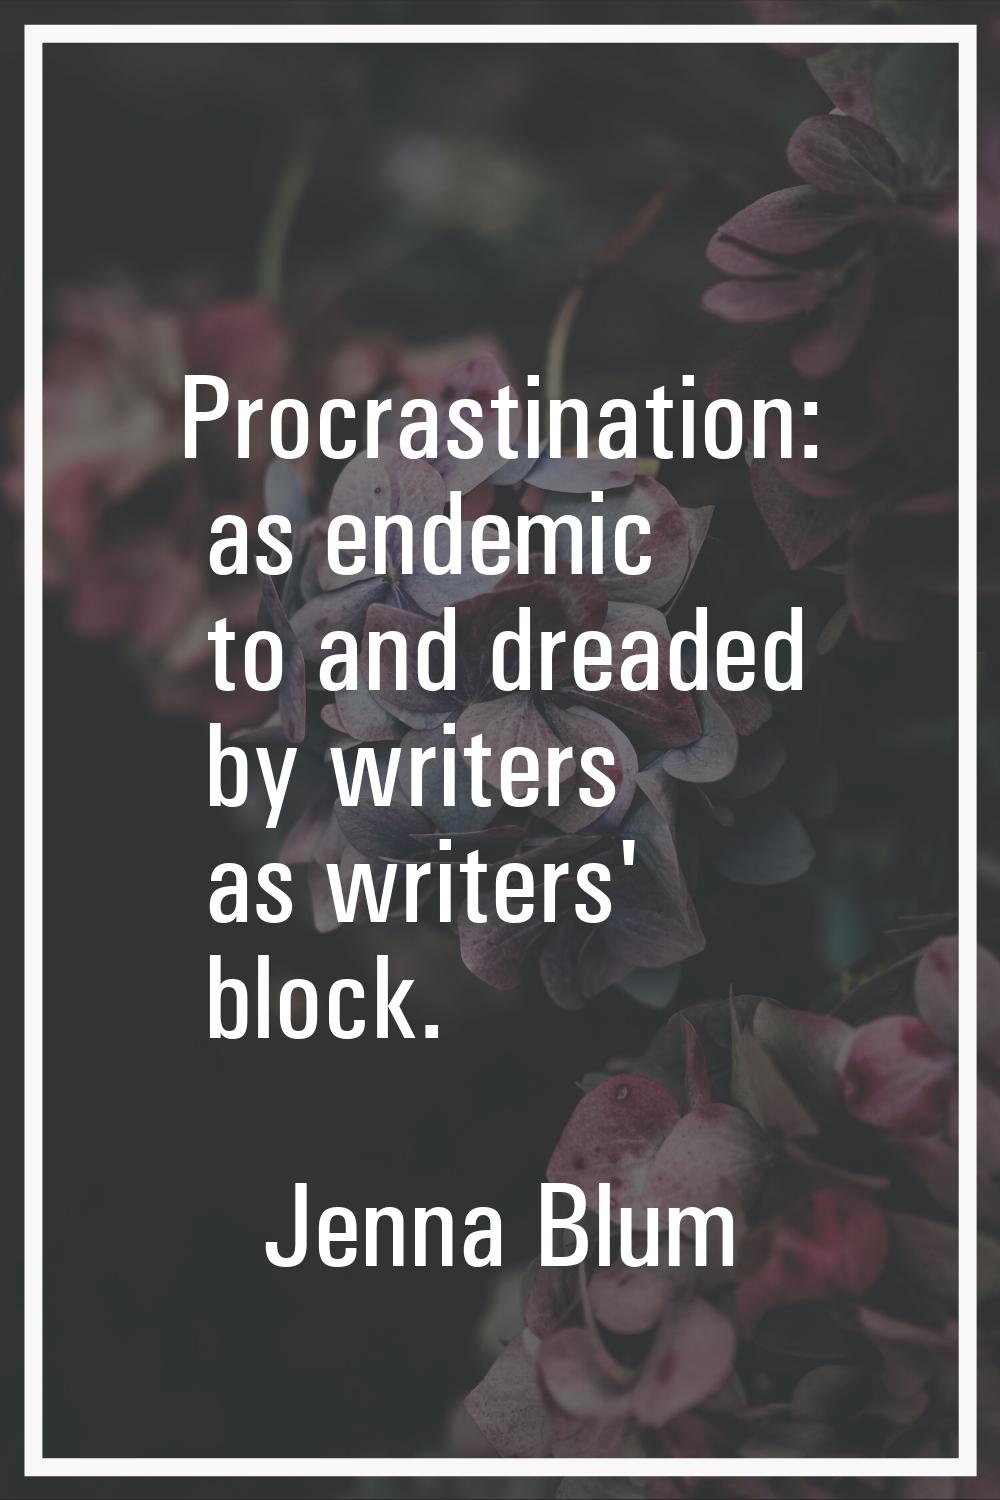 Procrastination: as endemic to and dreaded by writers as writers' block.